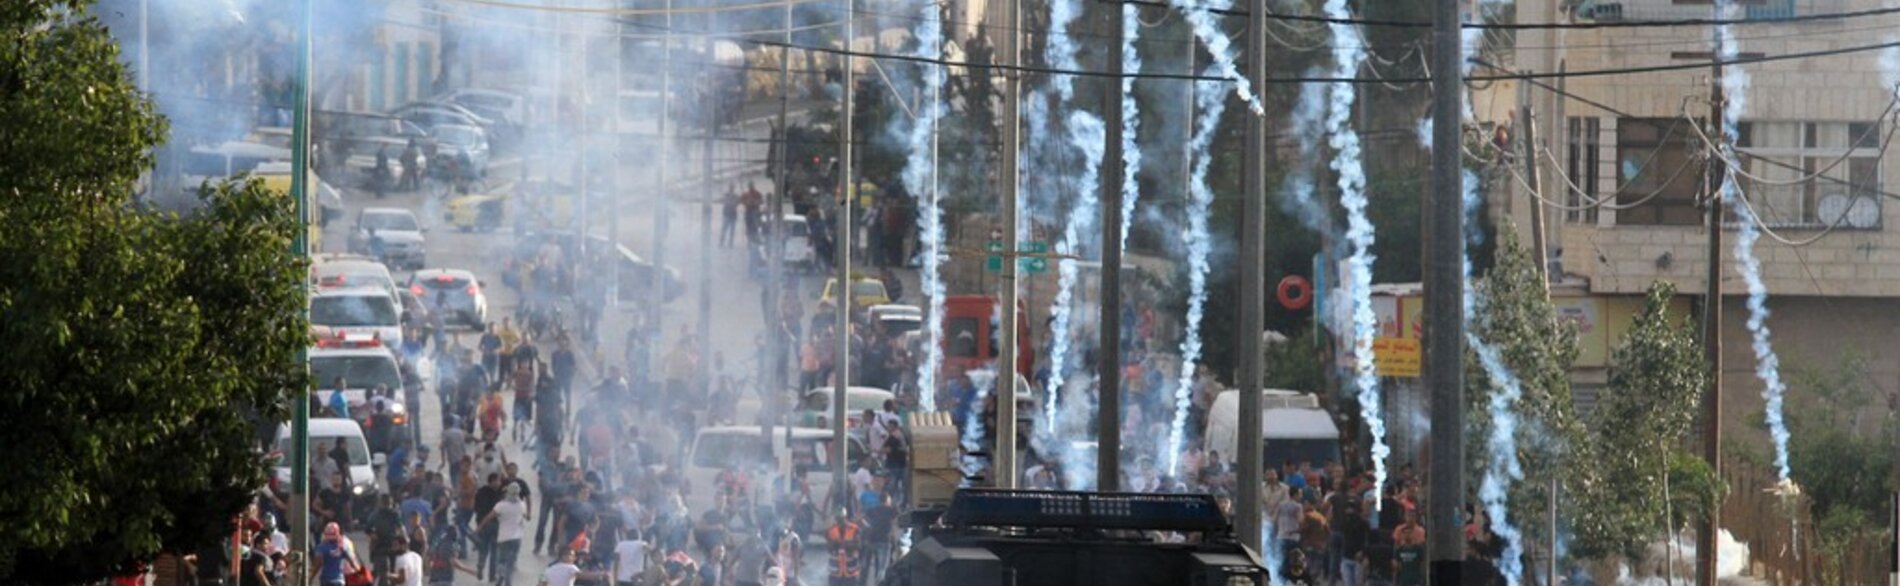 Clashes at the northern entrance of Bethlehem city (Rachel’s Tomb), 13 October 2015. Photo by Ahmad Mezher